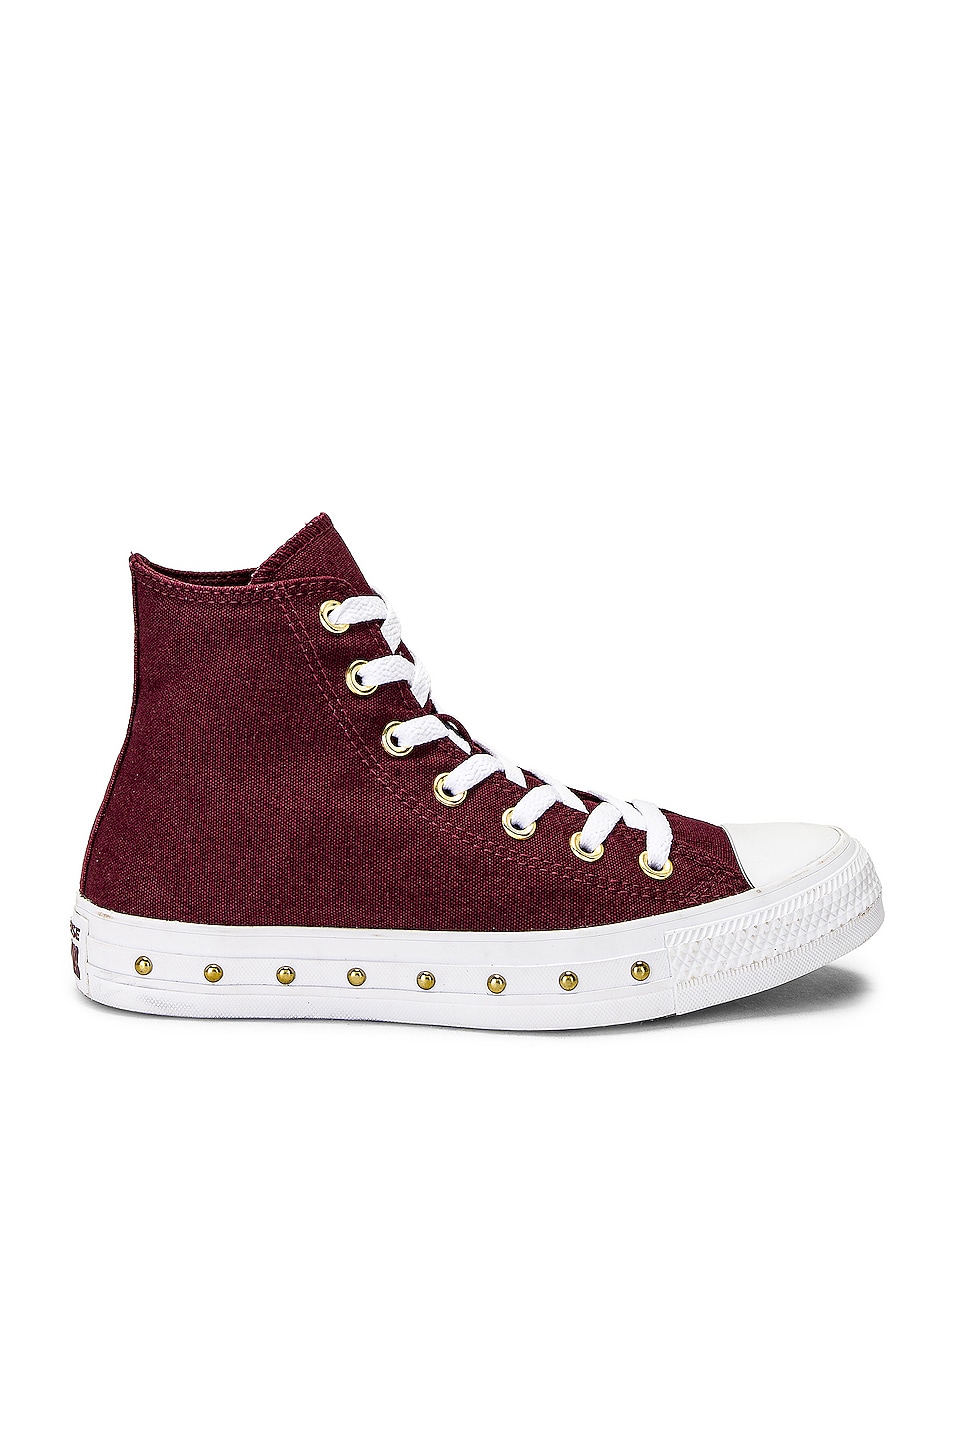 Image 1 of Converse Chuck 70 Sneaker in Phantom Violet, White, & Gold